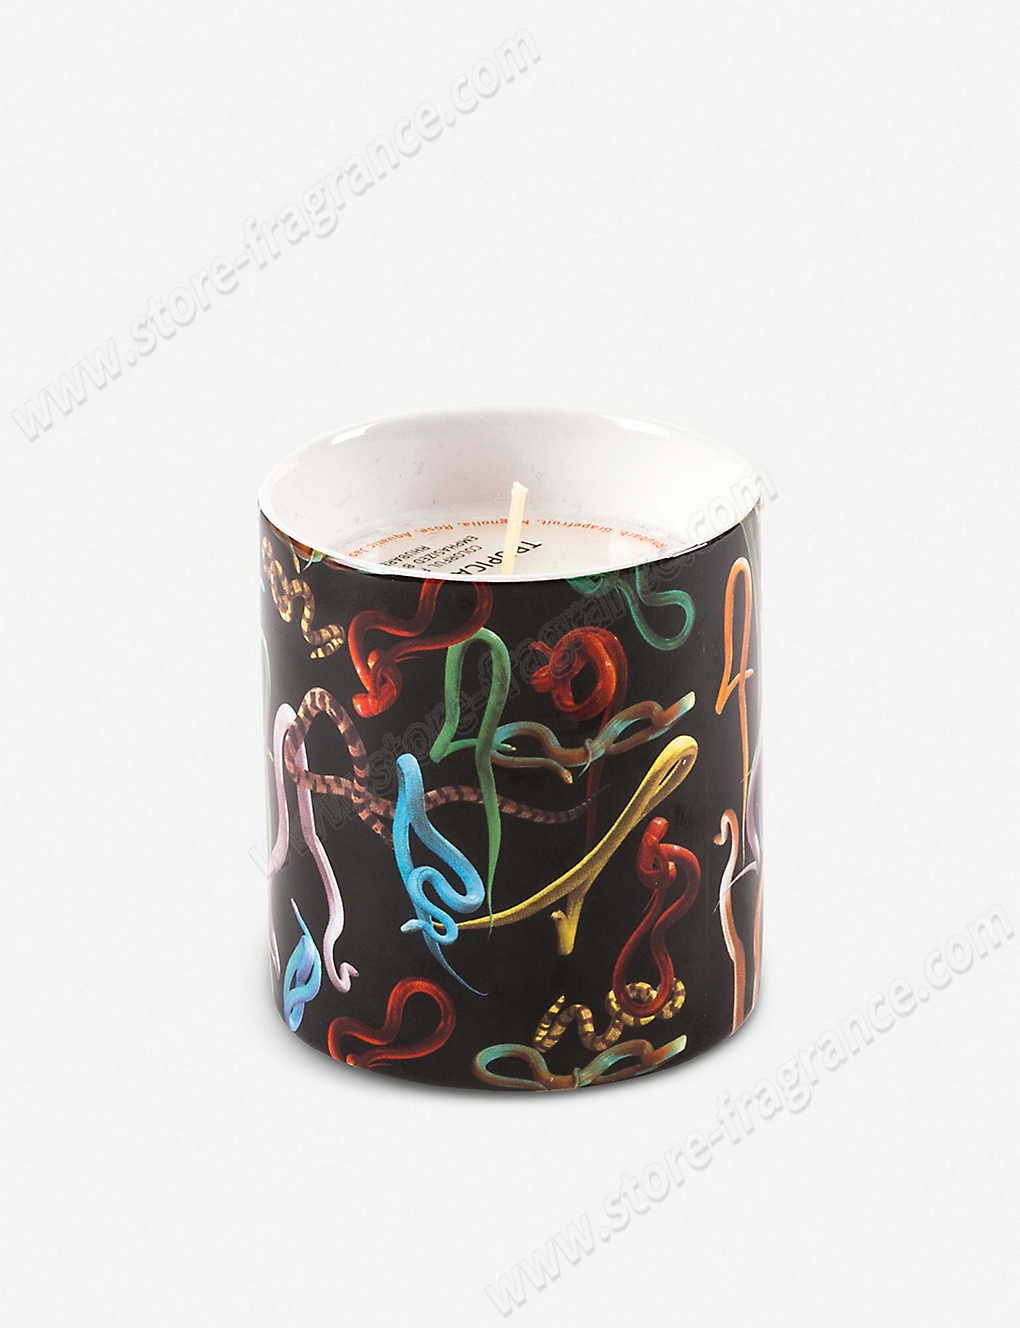 SELETTI/Seletti Wears Toiletpaper Snake Tropical haze porcelain scented candle 400g ✿ Discount Store - SELETTI/Seletti Wears Toiletpaper Snake Tropical haze porcelain scented candle 400g ✿ Discount Store